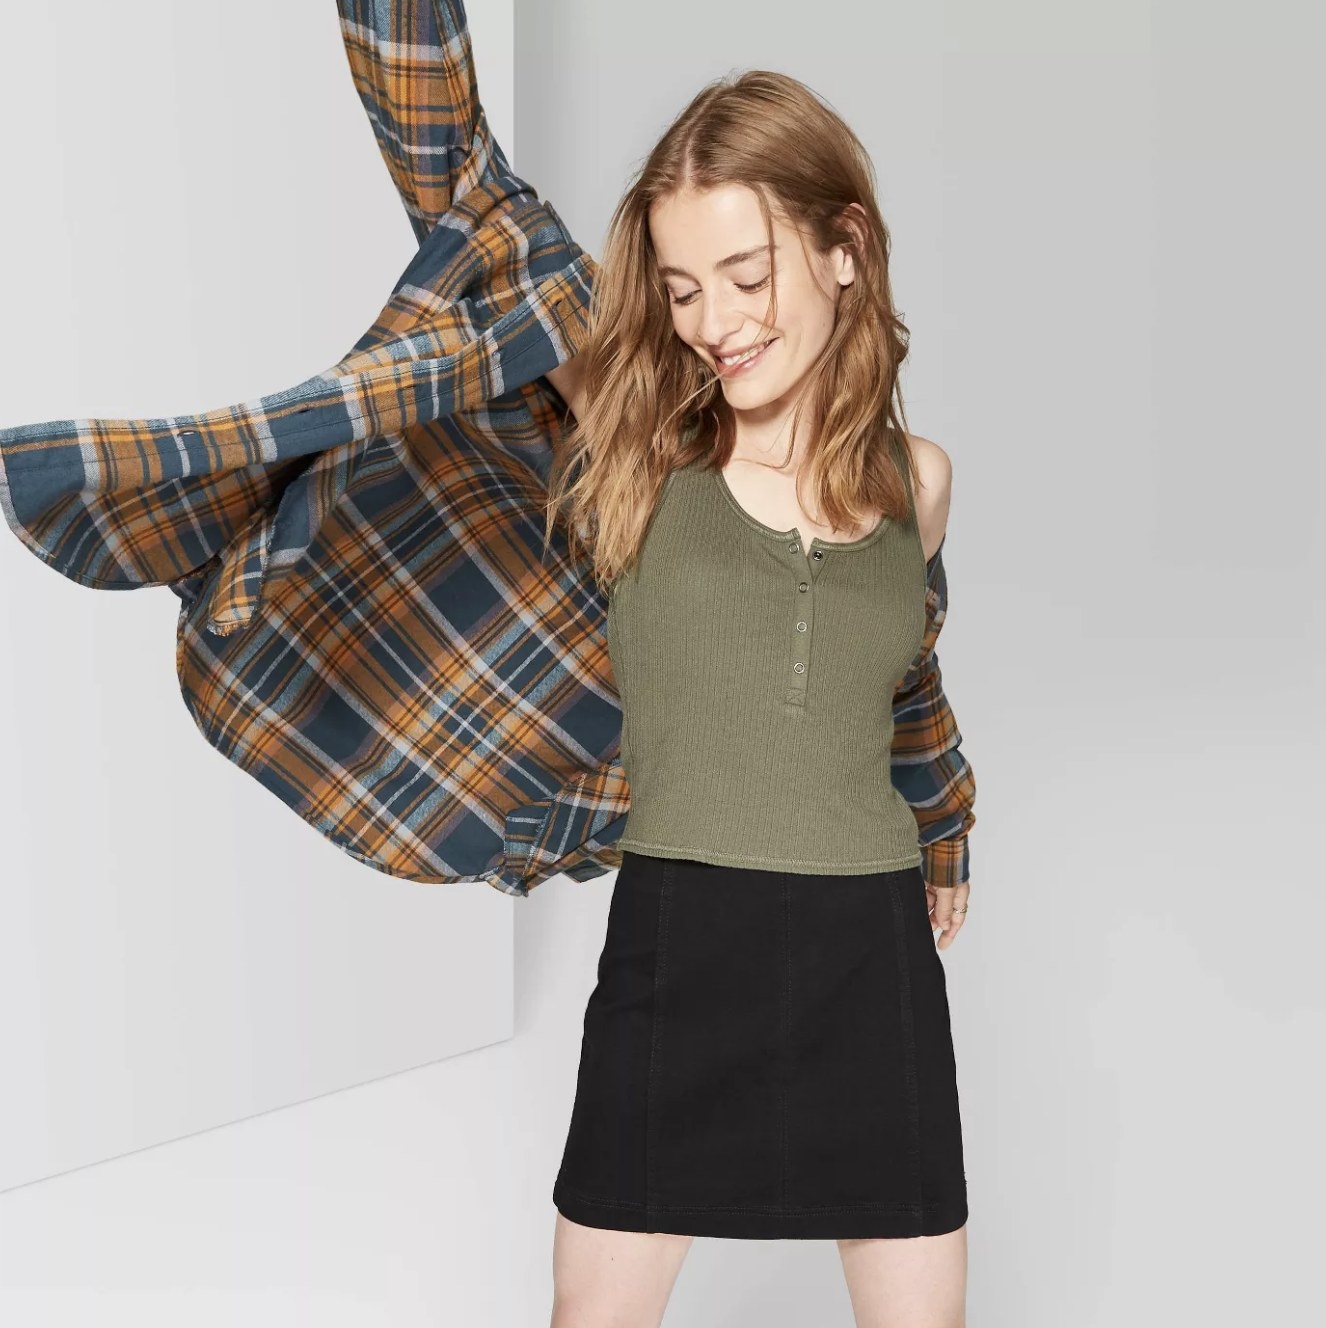 Model styles black skirt with green tank and plaid button down. 